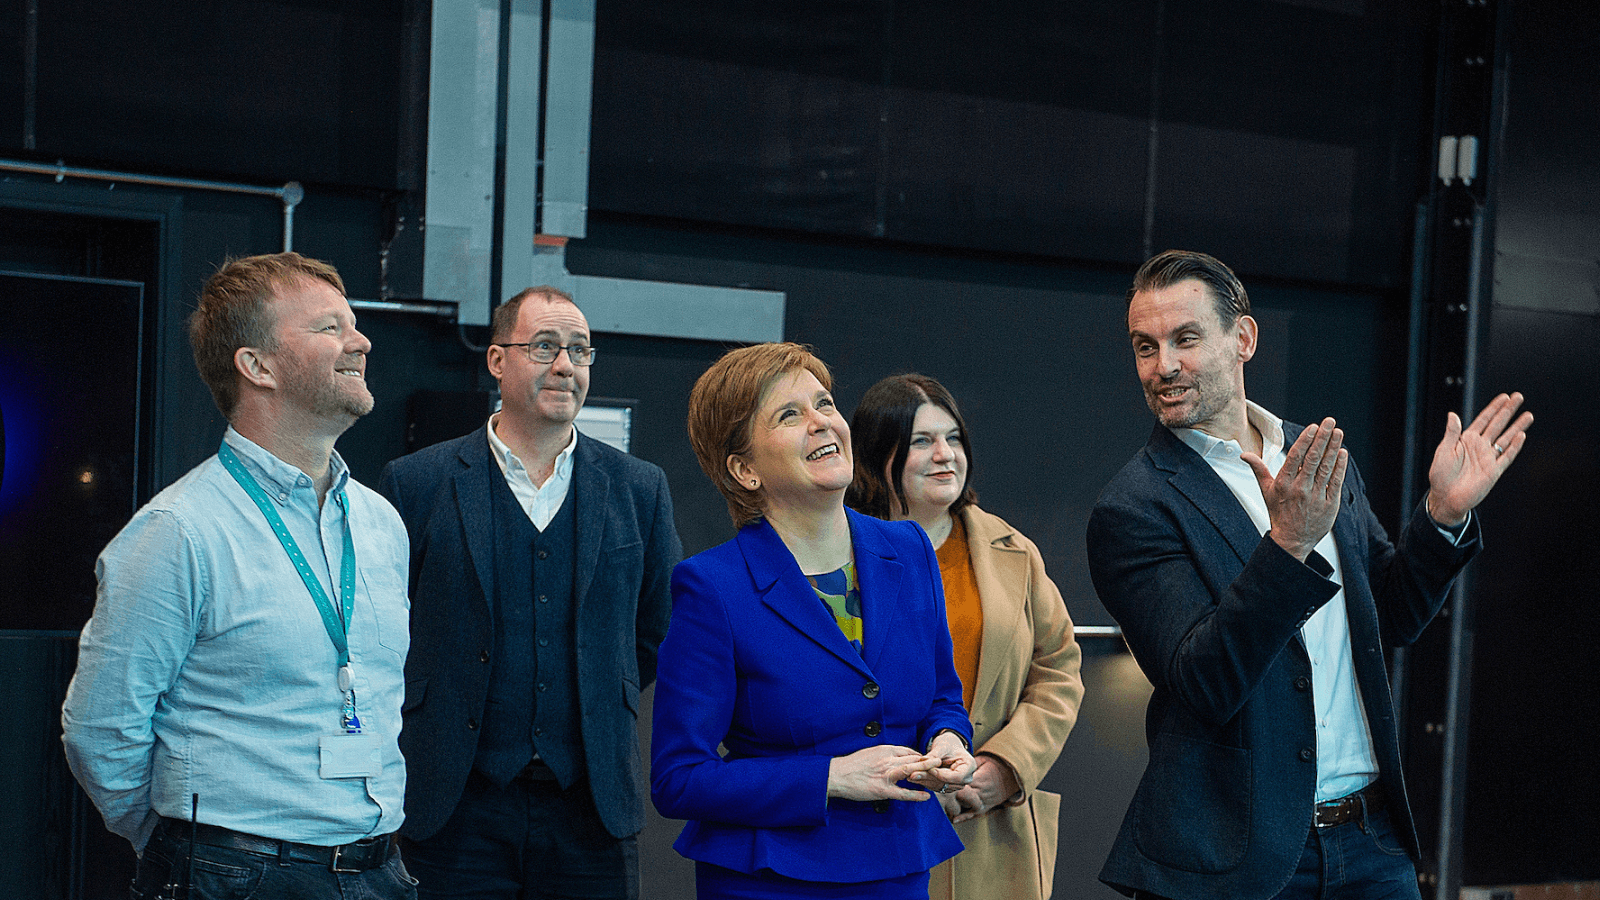 Courtesy of BBC Studioworks - Nicola Sturgeon visits BBC Studioworks, Kelvin Hall. Nicola wears a blue suit jacket and skirt, and is surrounded by two men on her left, including David Smith Director at Screen Scotland, and a man and a woman, Councillor Susan Aitken, Leader of Glasgow City Council on her right. The man on her right wears a suit and is looking at her, while pointing out someone to the top right, which everyone else is looking at.